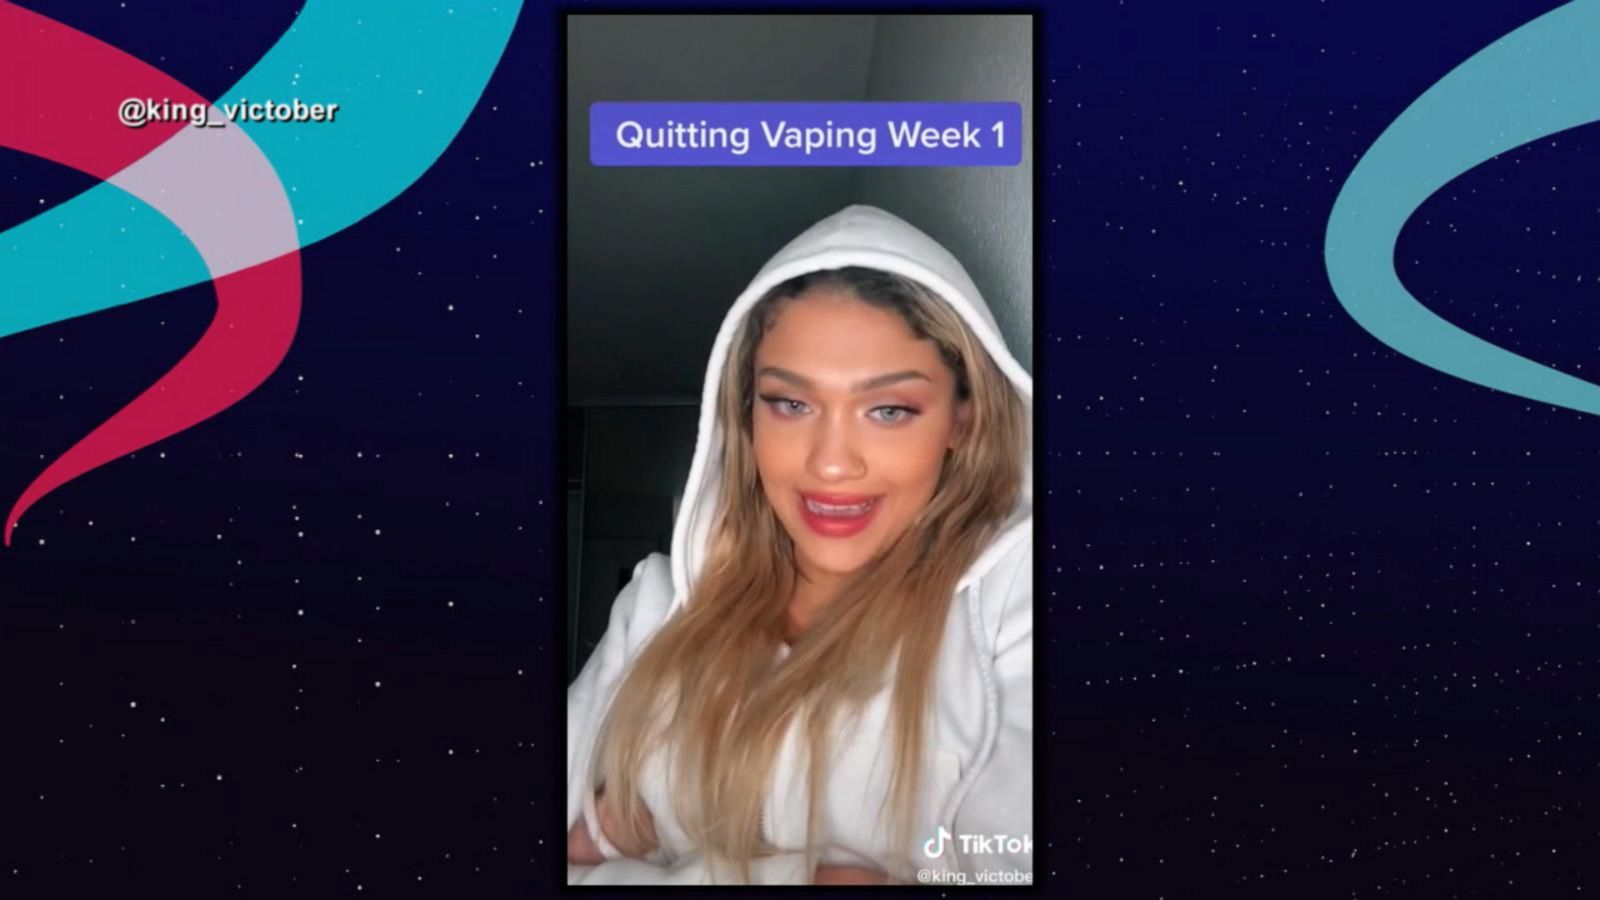 VIDEO: How TikTok influencers are getting teens and young adults to quit vaping